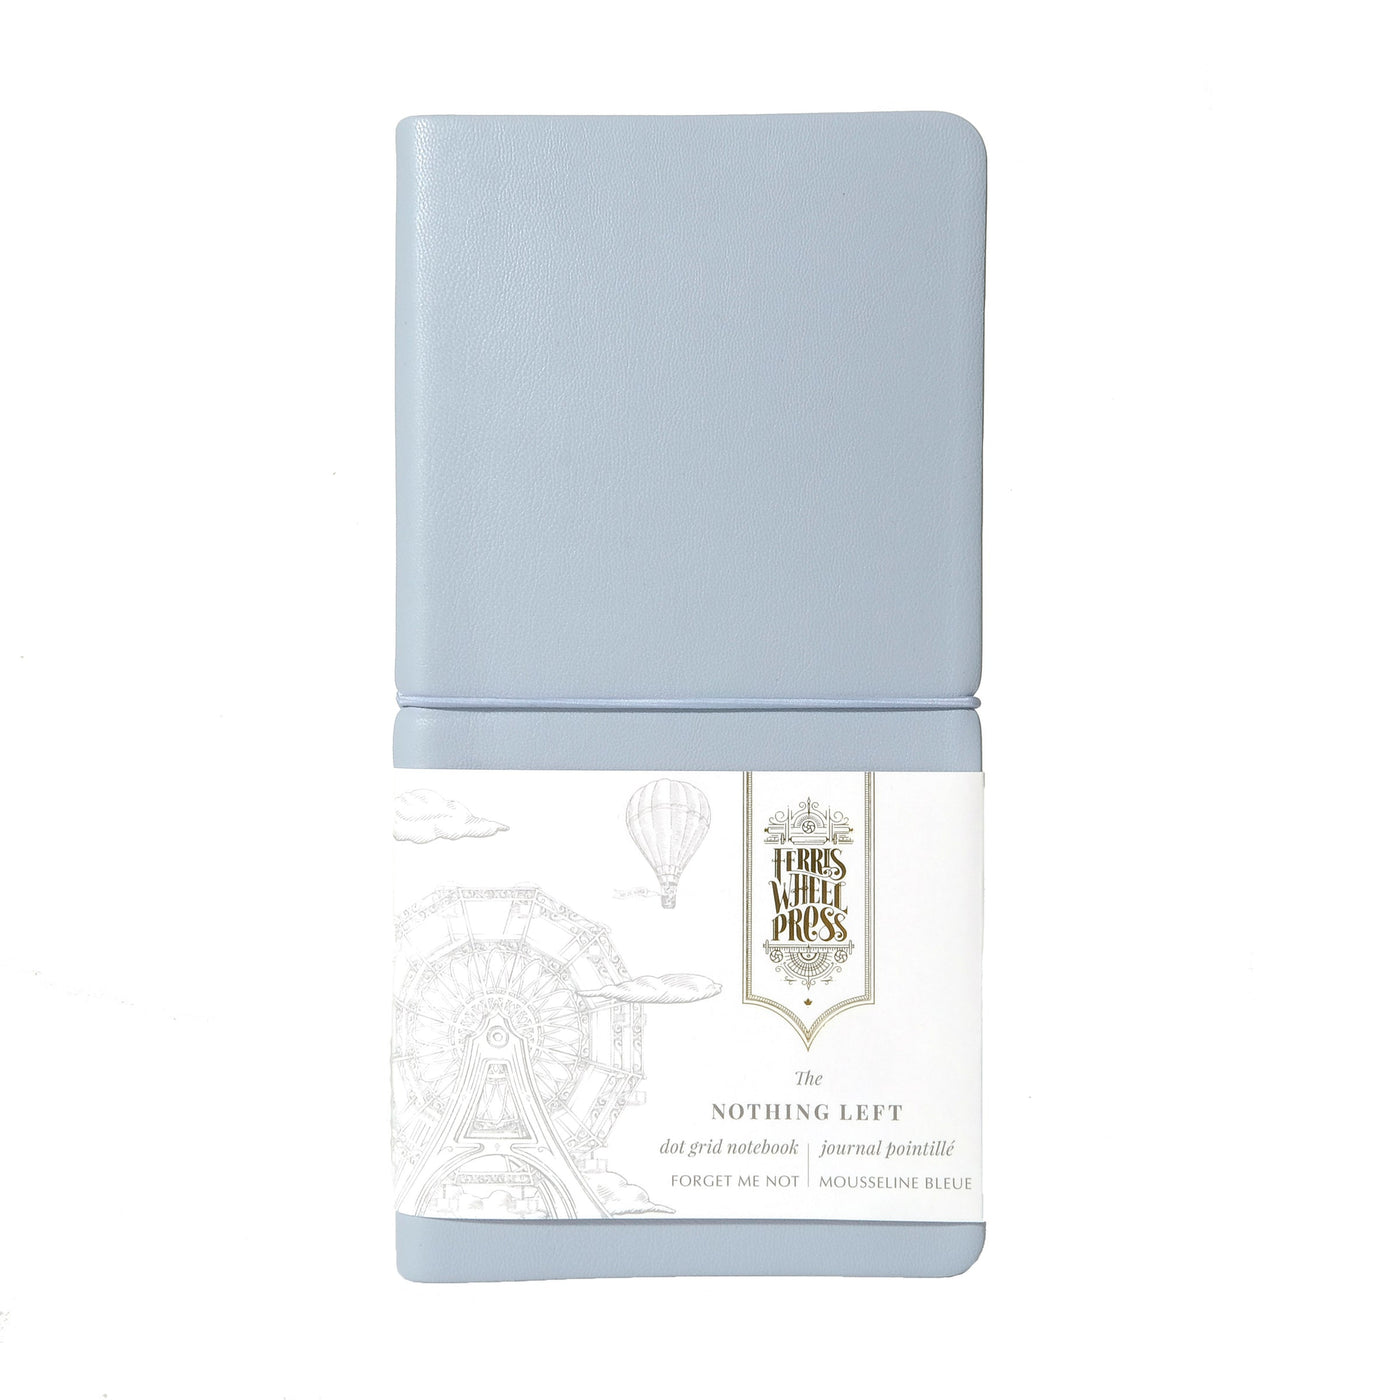 Ferris Wheel Press Nothing Left Notebook - Forget Me Not | Atlas Stationers.